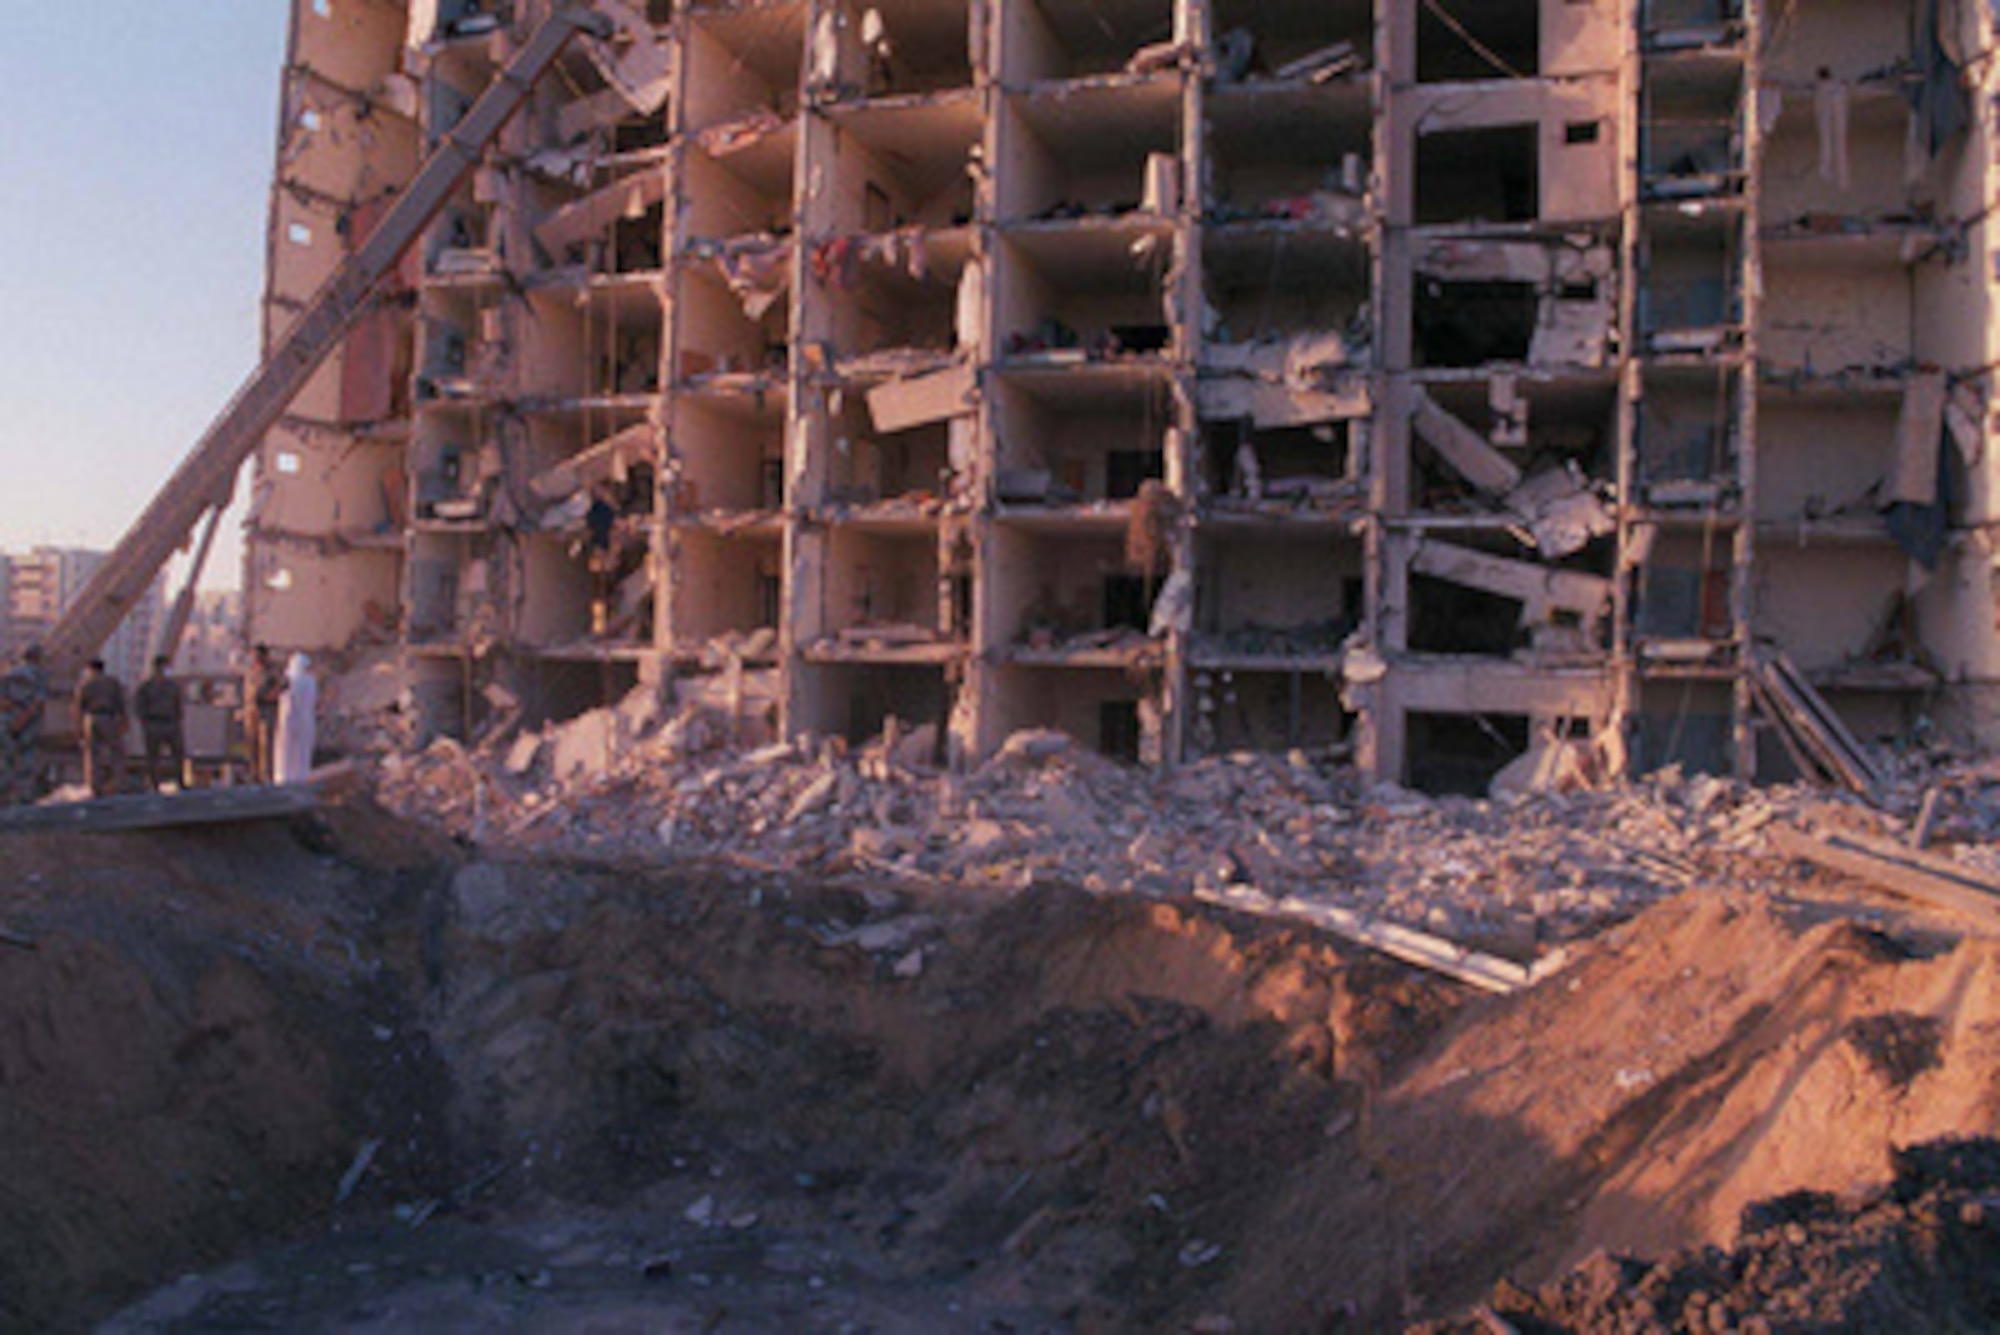 U.S. and Saudi military personnel survey the damage to Khobar Towers caused by the explosion of a fuel truck outside the northern fence of the facility on King Abdul Aziz Air Base near Dhahran, Saudi Arabia, at 2:55 p.m. EDT, Tuesday, June 25, 1996. Several buildings were damaged and there were numerous U.S. casualties. The latest information from Dhahran indicates that 19 people are dead and 64 people are hospitalized. Additionally, over 200 have been treated for injuries and released. The facility houses U.S. service members and serves as the headquarters for the U.S. Air Force's 4404th Wing (Provisional), Southwest Asia.